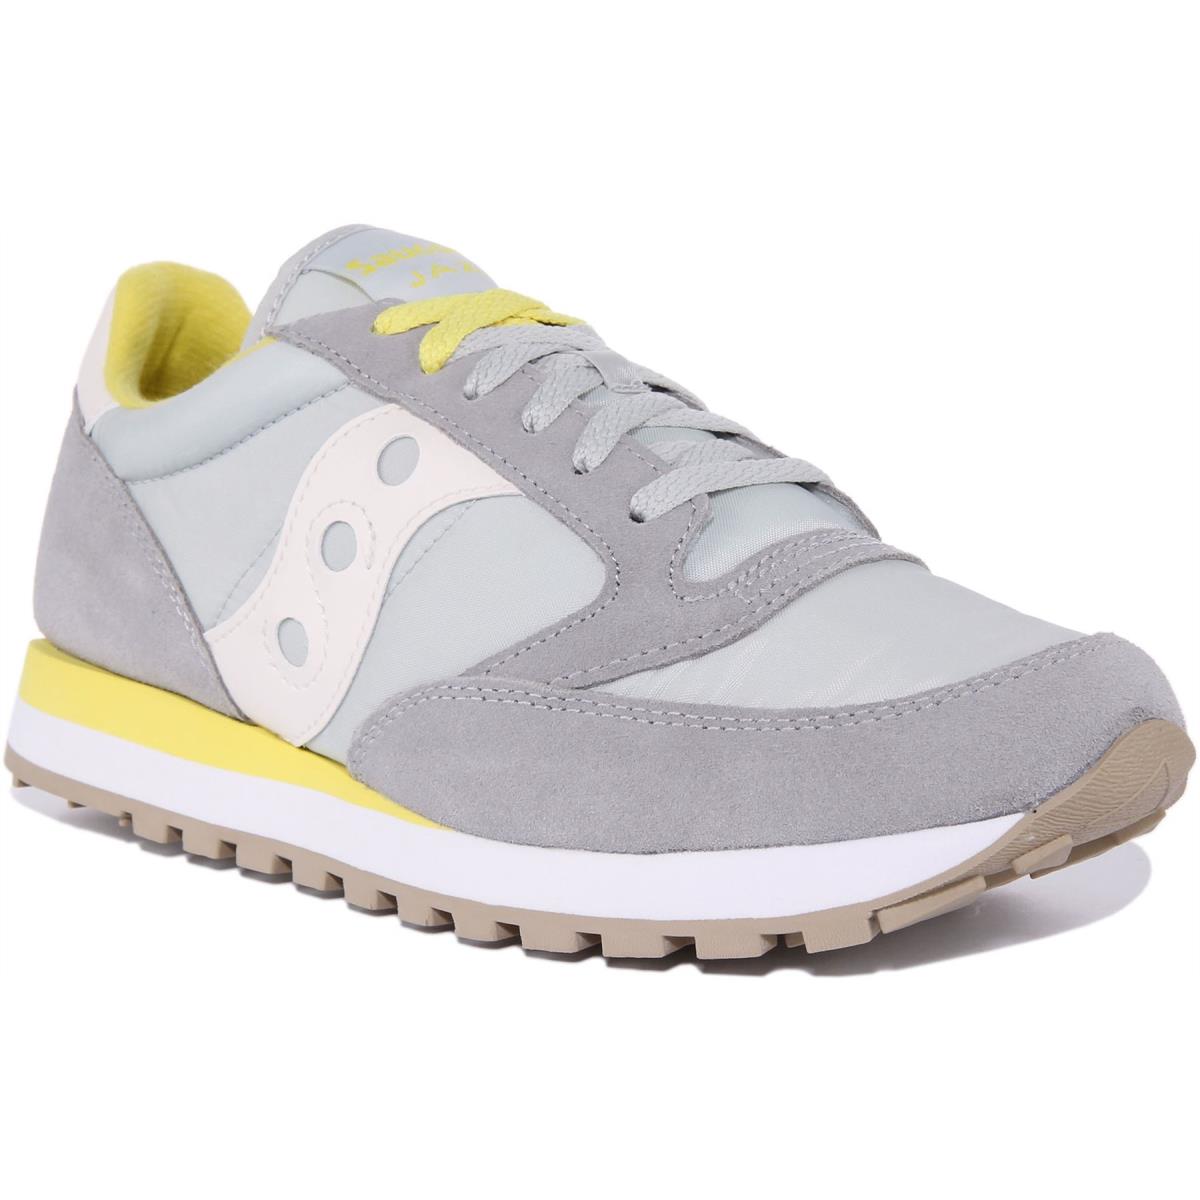 Saucony Jazz Mens Lace Up 80s Retro Sneakers In Grey Size US 7 - 13 GREY